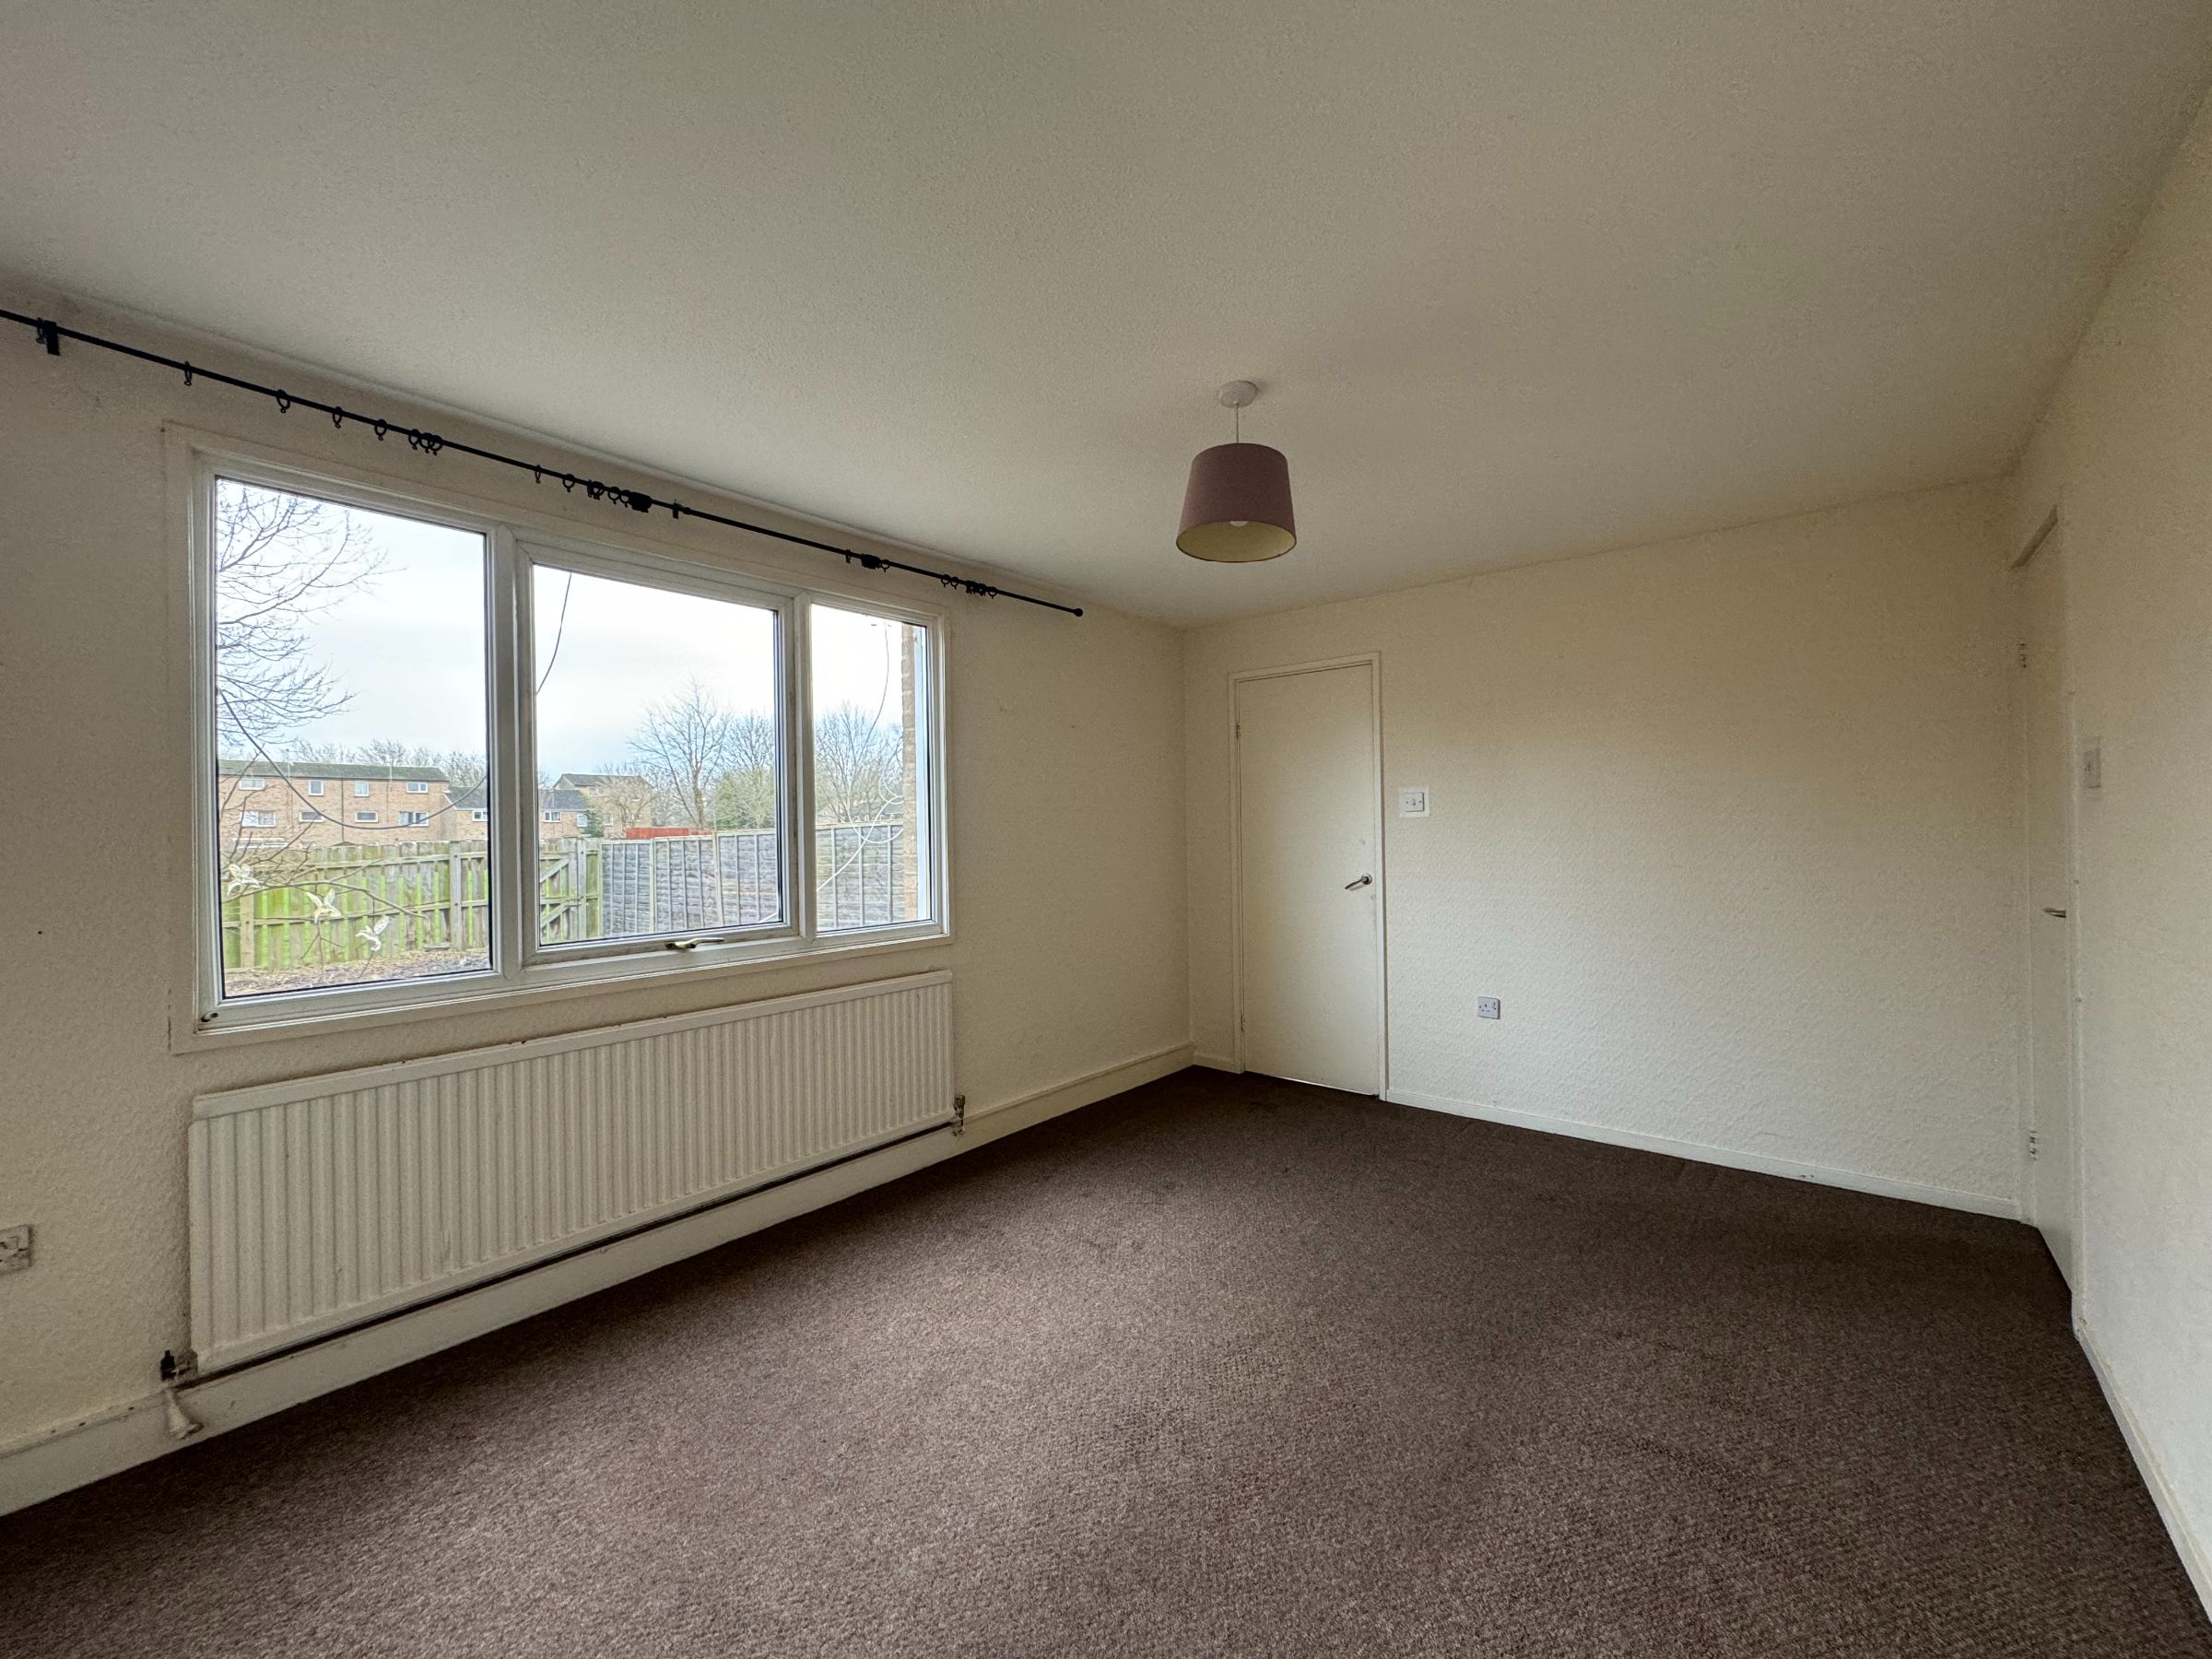 3 bed terraced house for sale in Manton, Peterborough  - Property Image 5